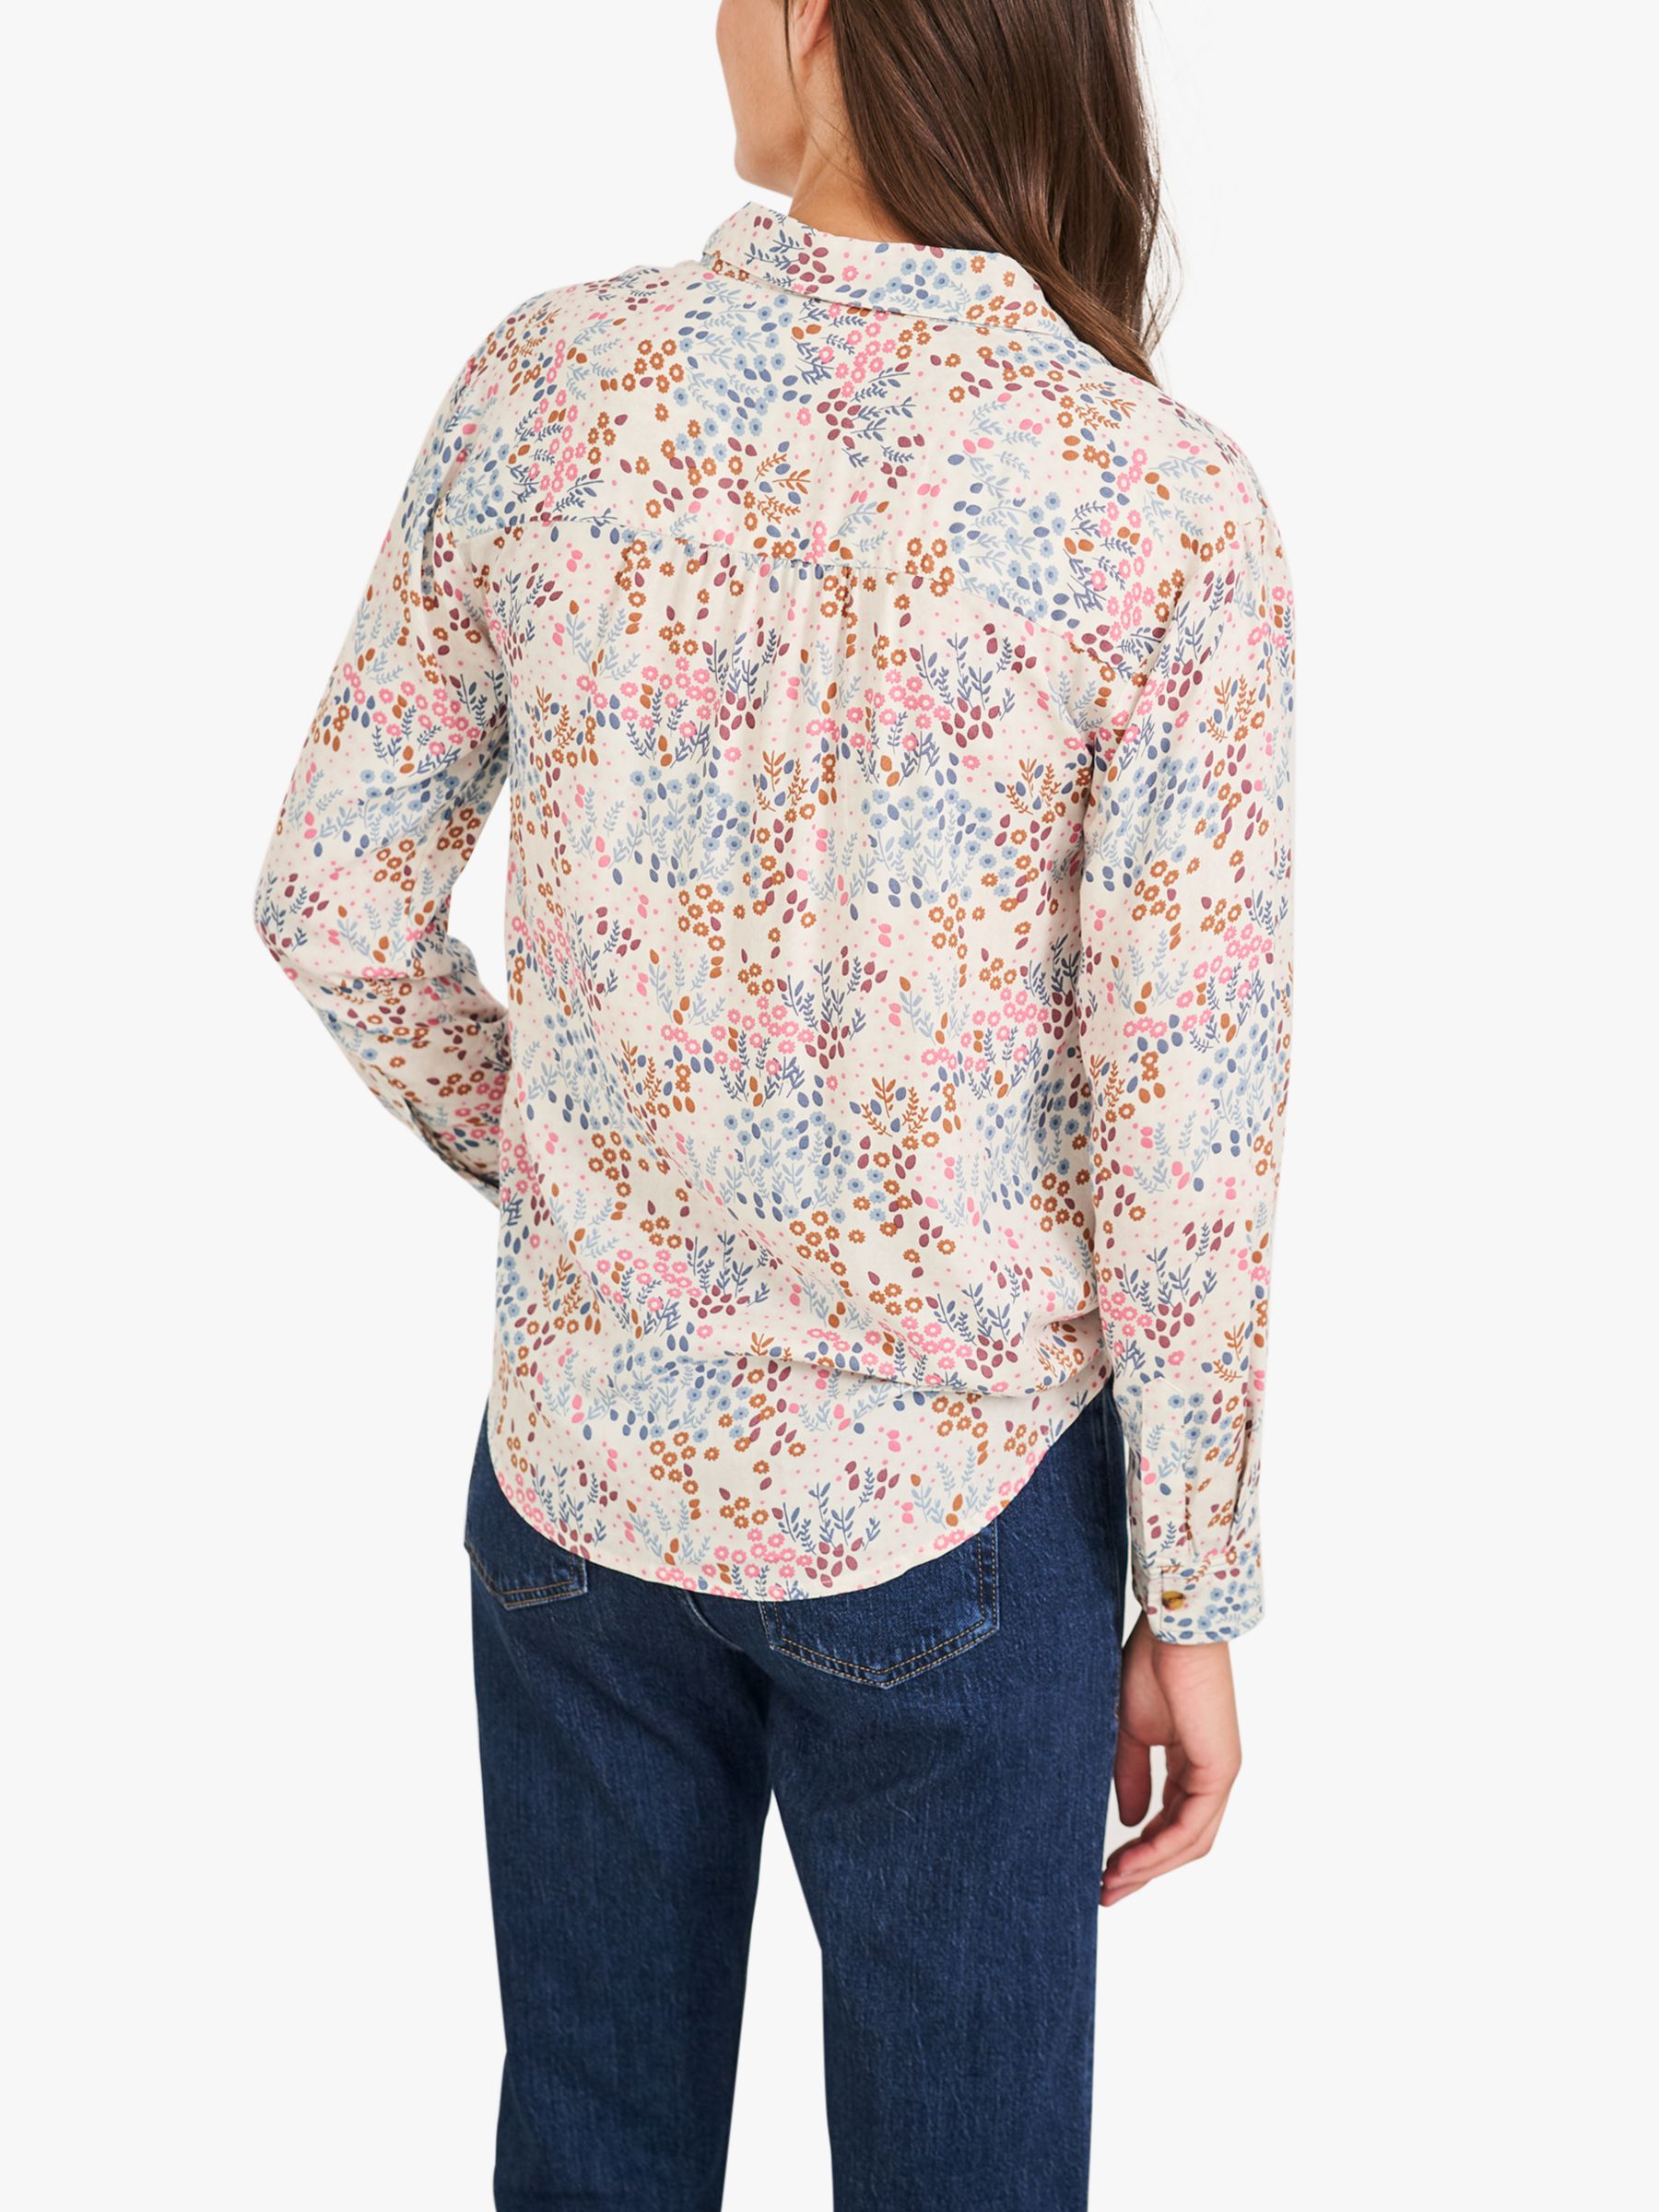 White Stuff Floral Printed Blouse Ivorymulti At John Lewis And Partners 0331